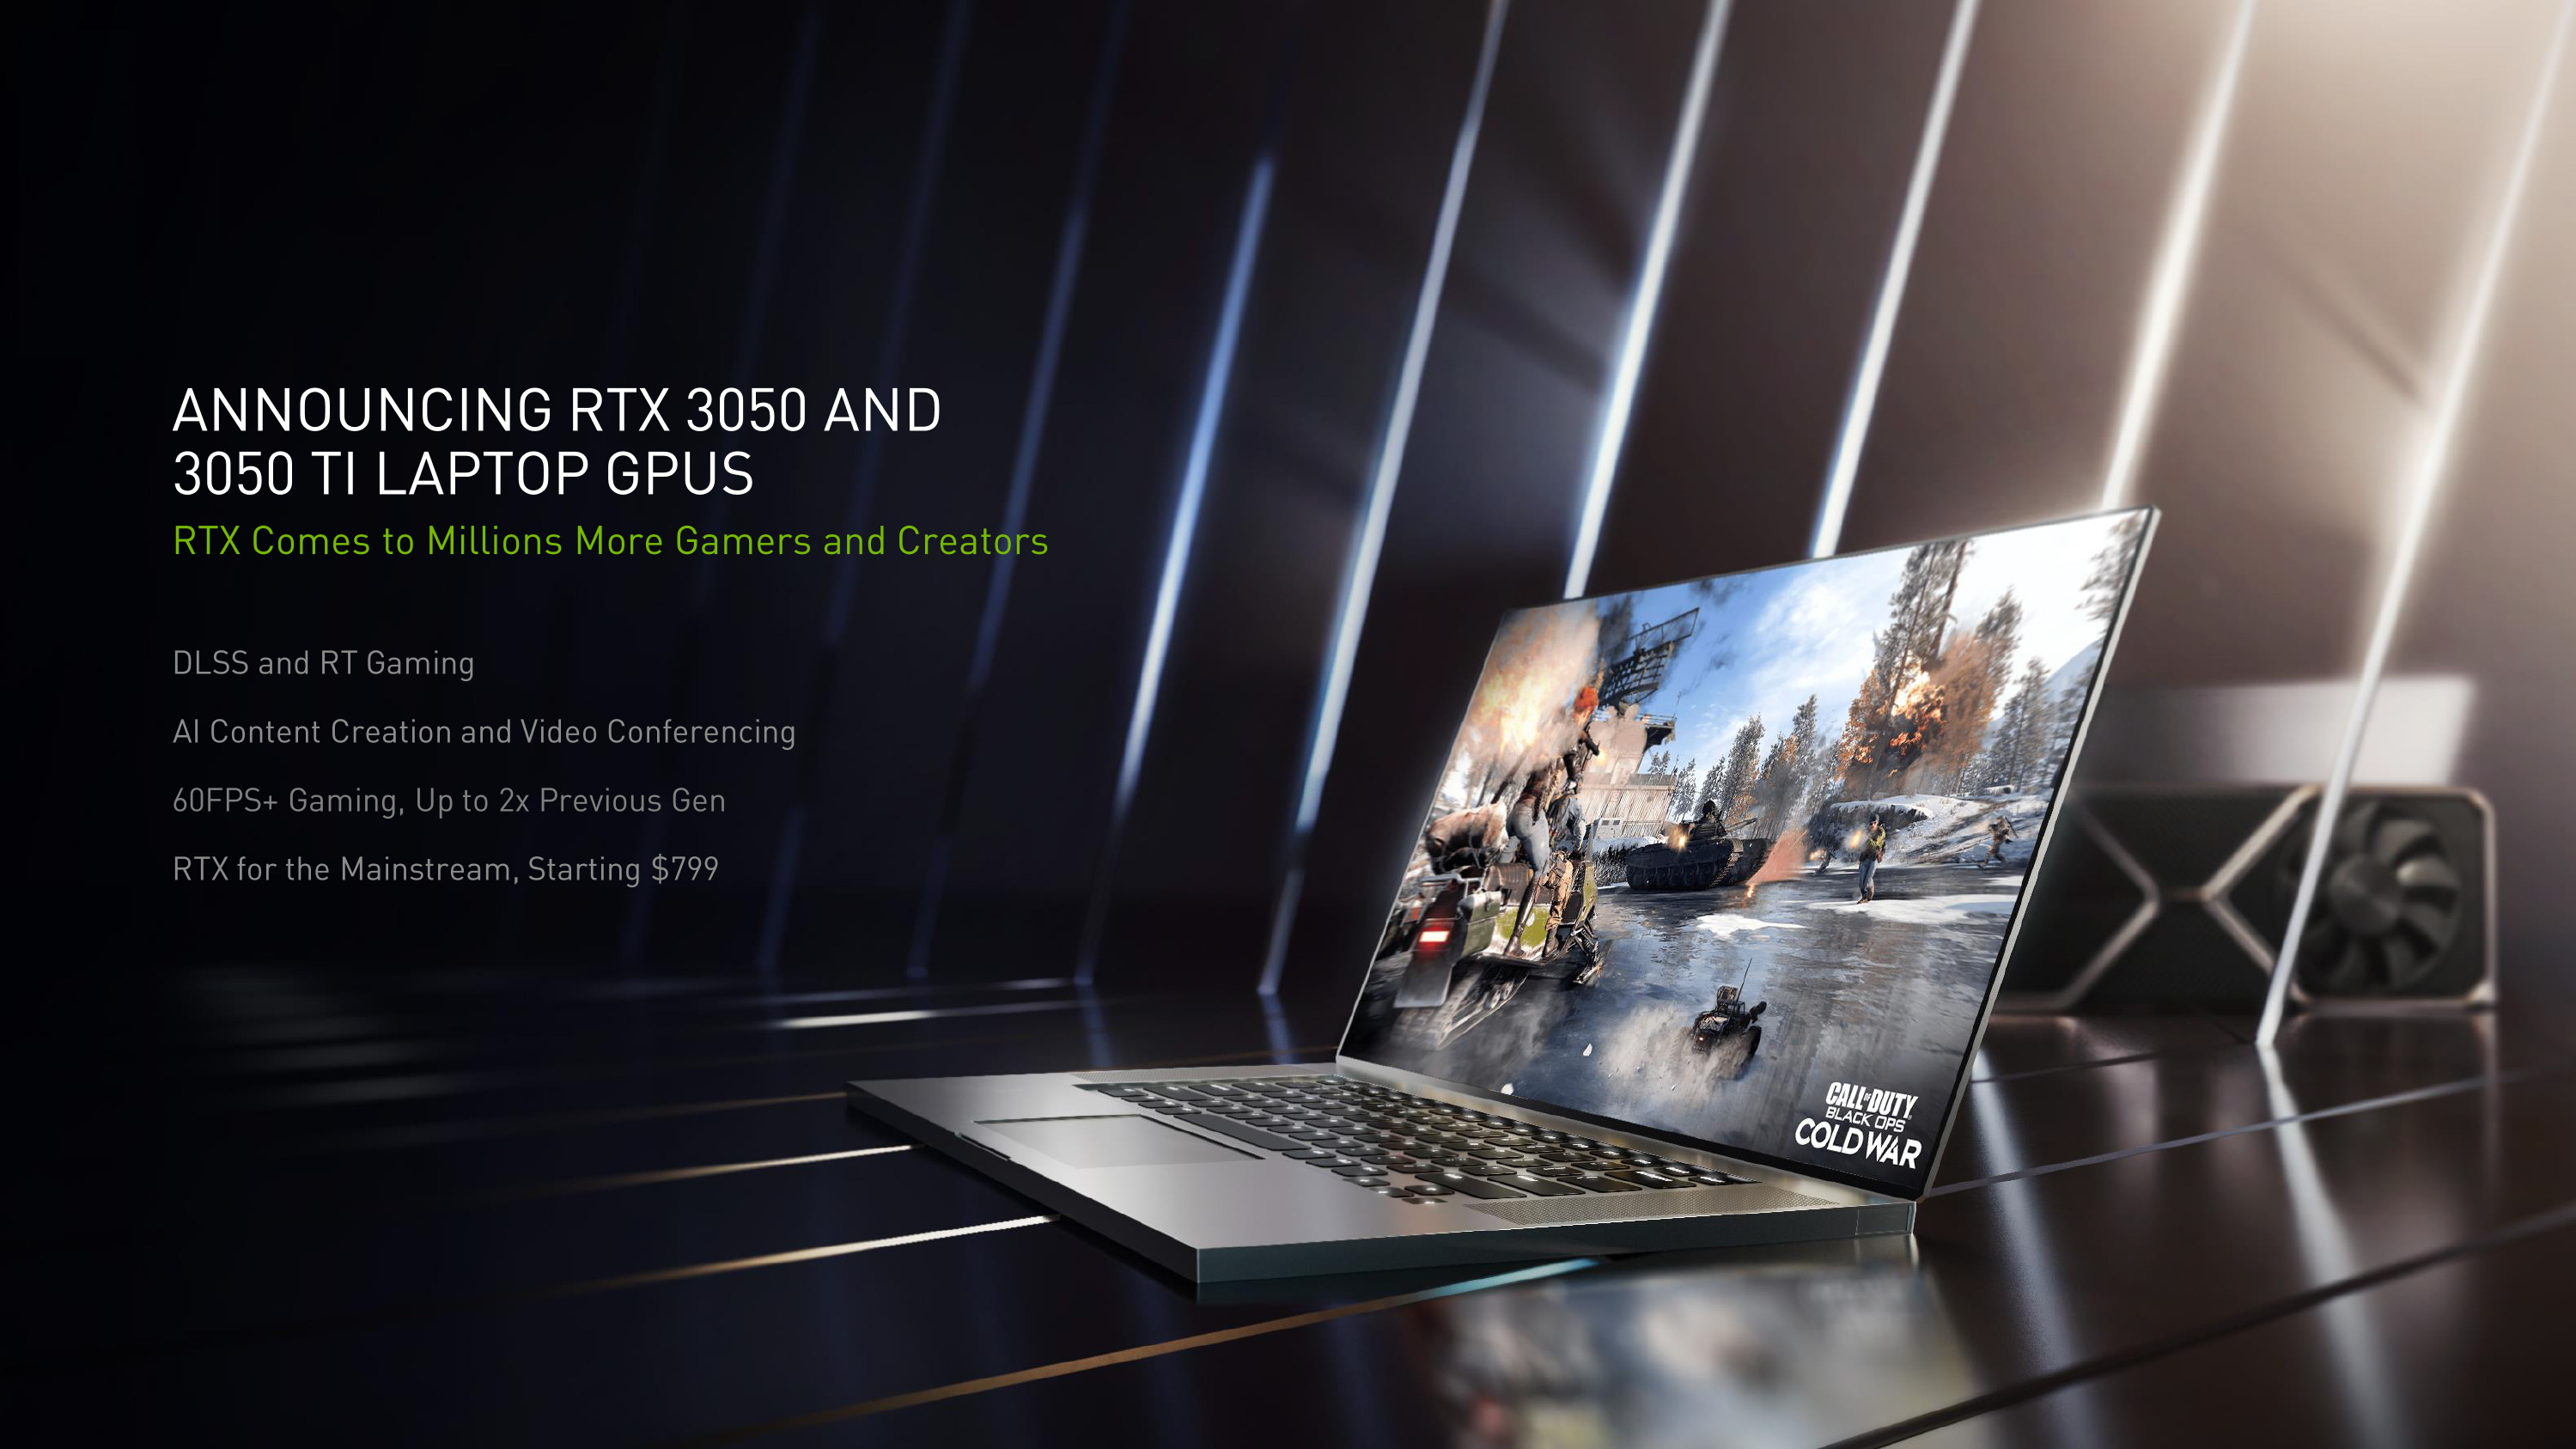 NVIDIA Launches and RTX 3050 Ti for Laptops